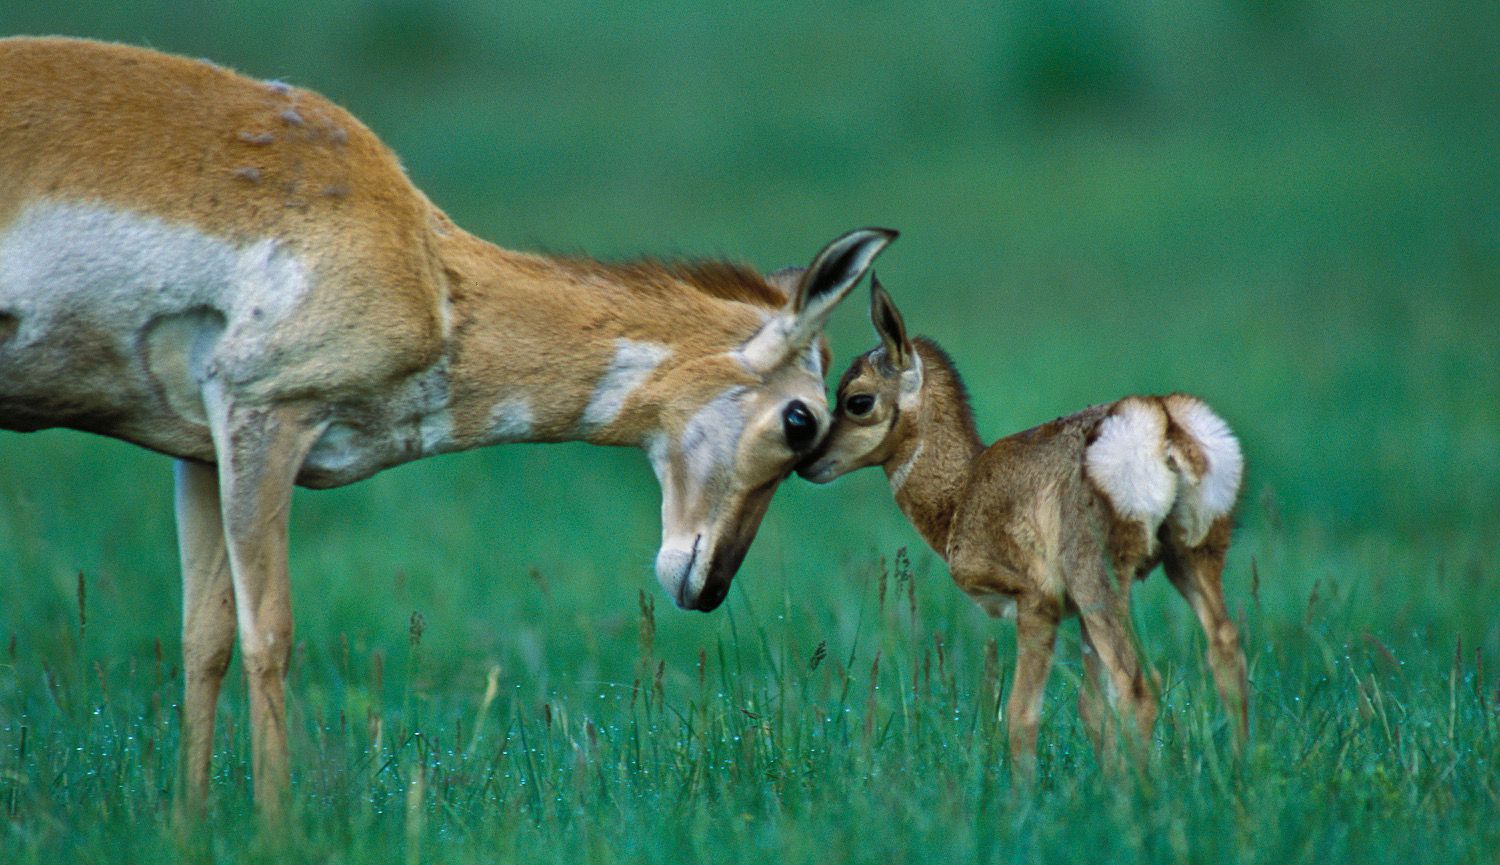 Two deer, a mother and baby in a green field.